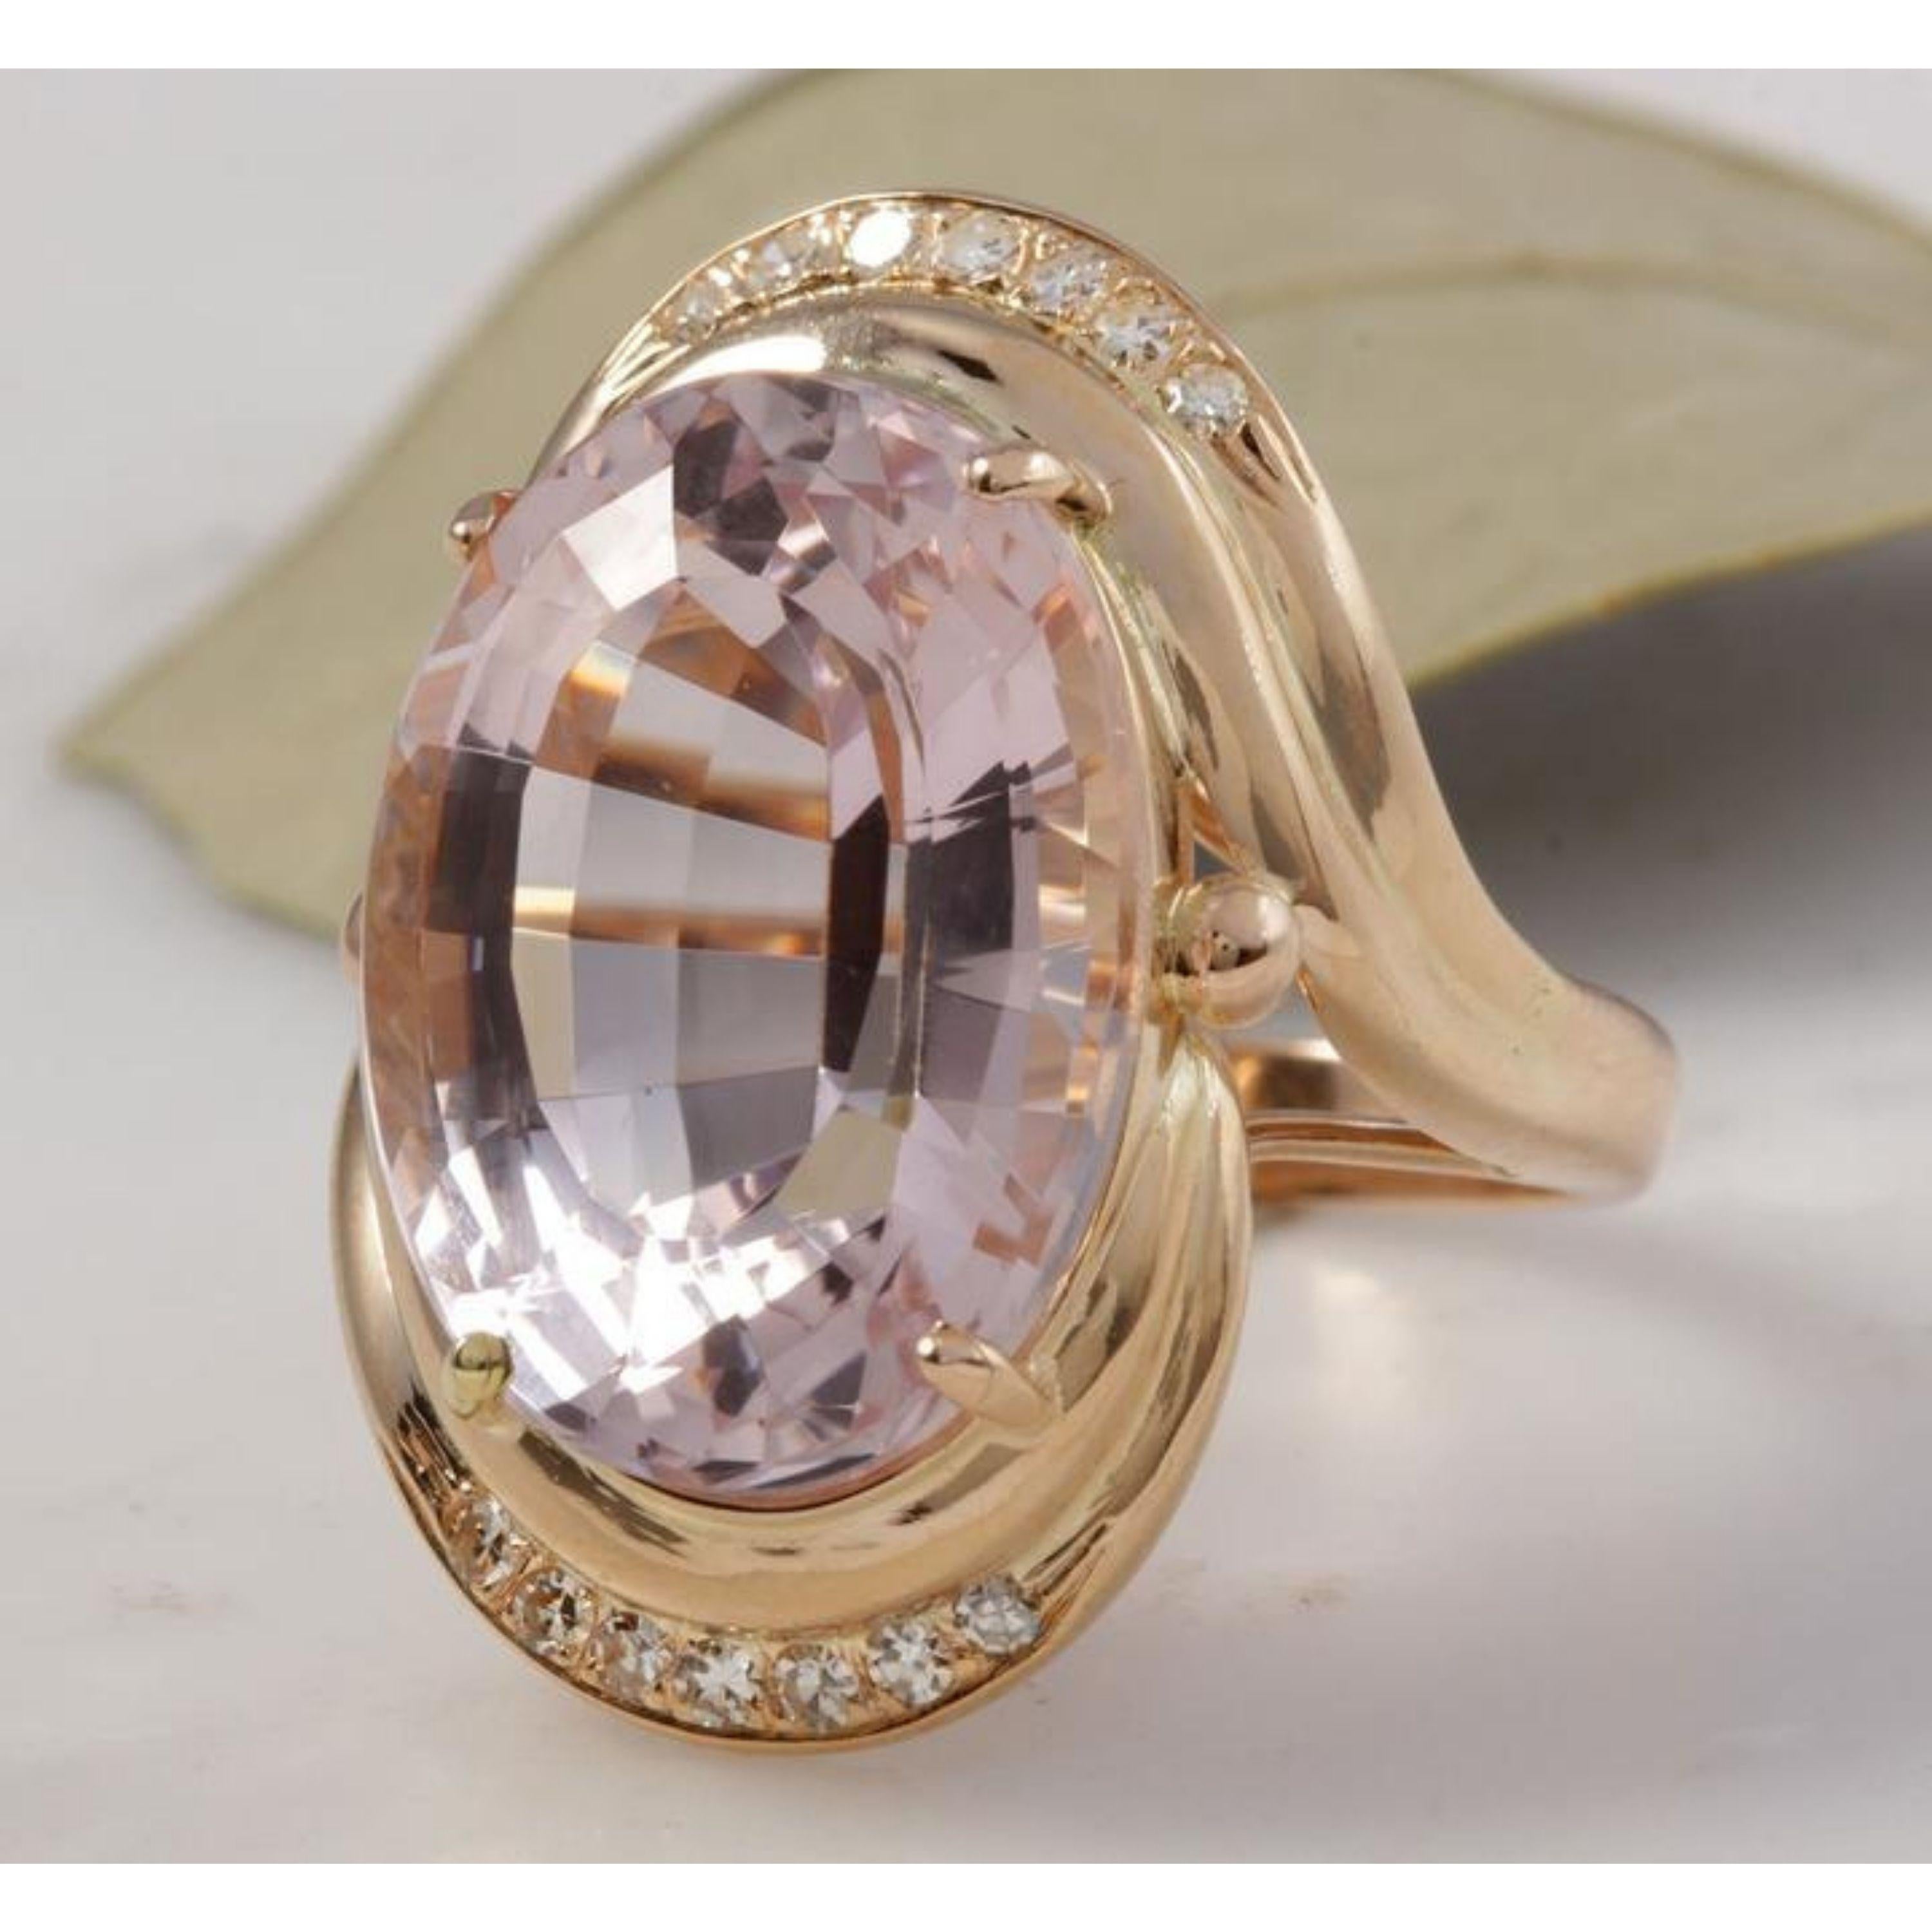 16.18 Carats Exquisite Natural Pink Kunzite and Diamond 14K Solid Rose Gold Ring

Total Natural Oval Shaped Kunzite Weights: 15.90 Carats (VS)

Kunzite Measures: 18.36 x 13.52mm

Natural Round Diamonds Weight: .28 Carats (color F-G / Clarity